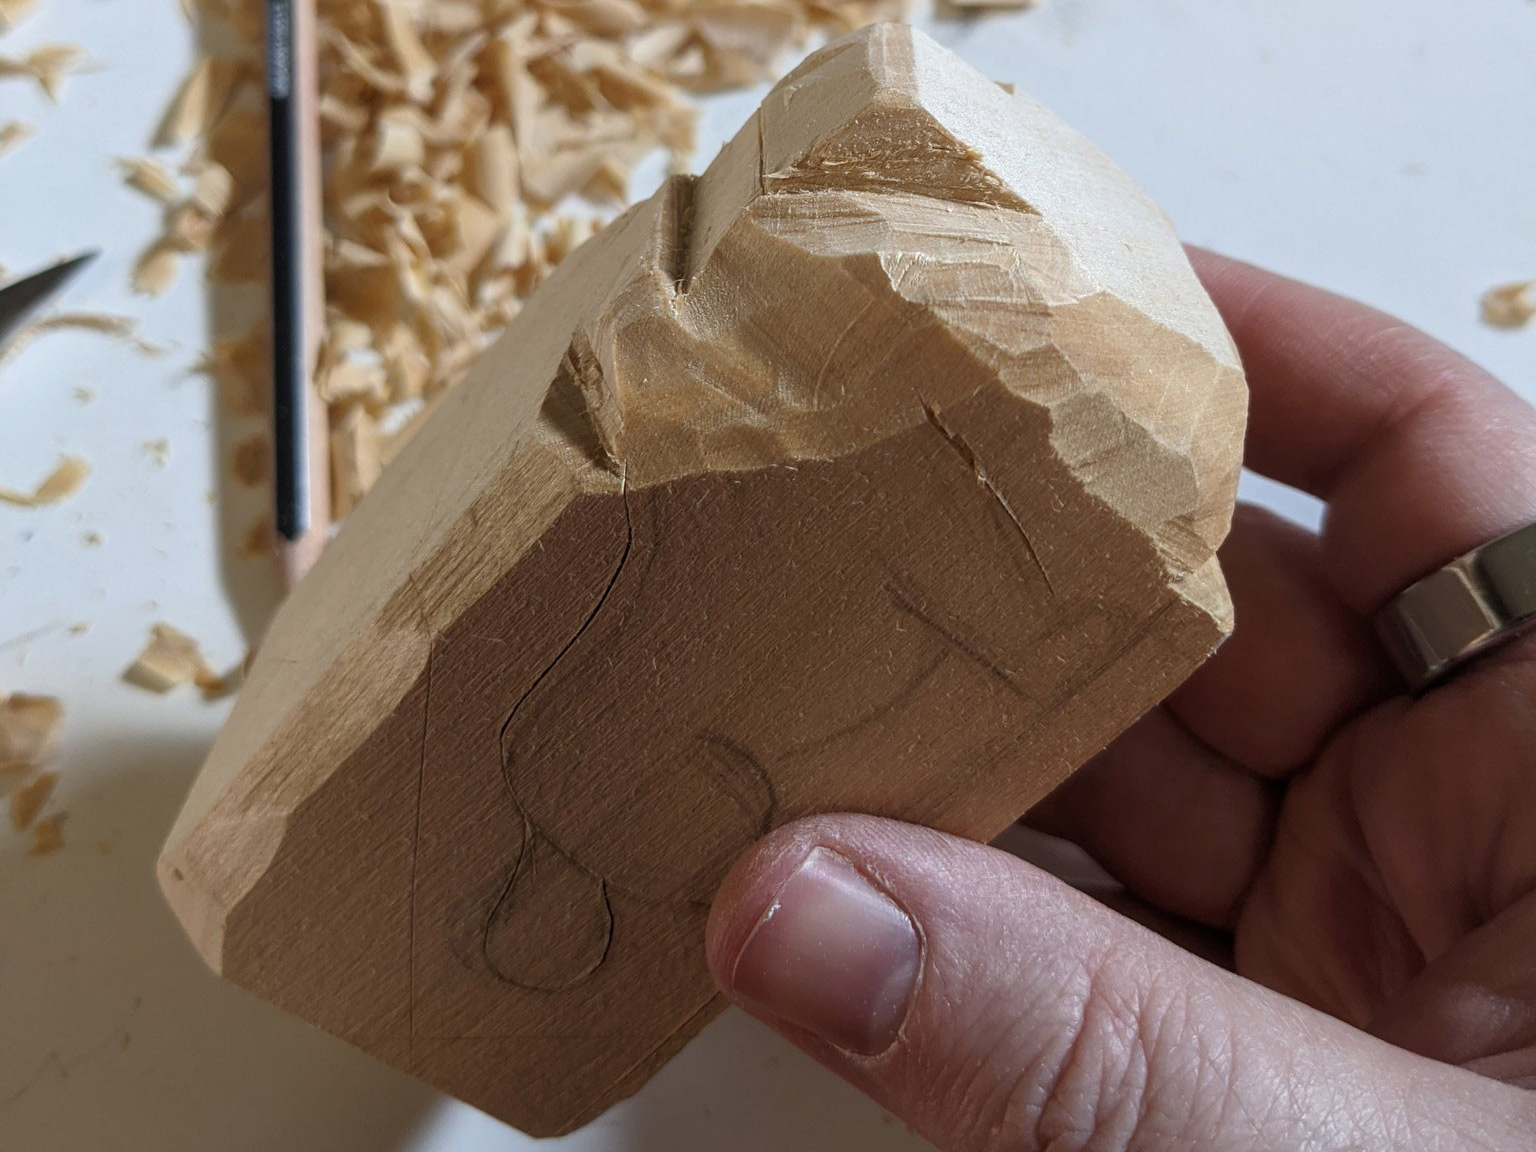 Rough chunks removed from the wood with a dog shape sketch on the side of the wood.